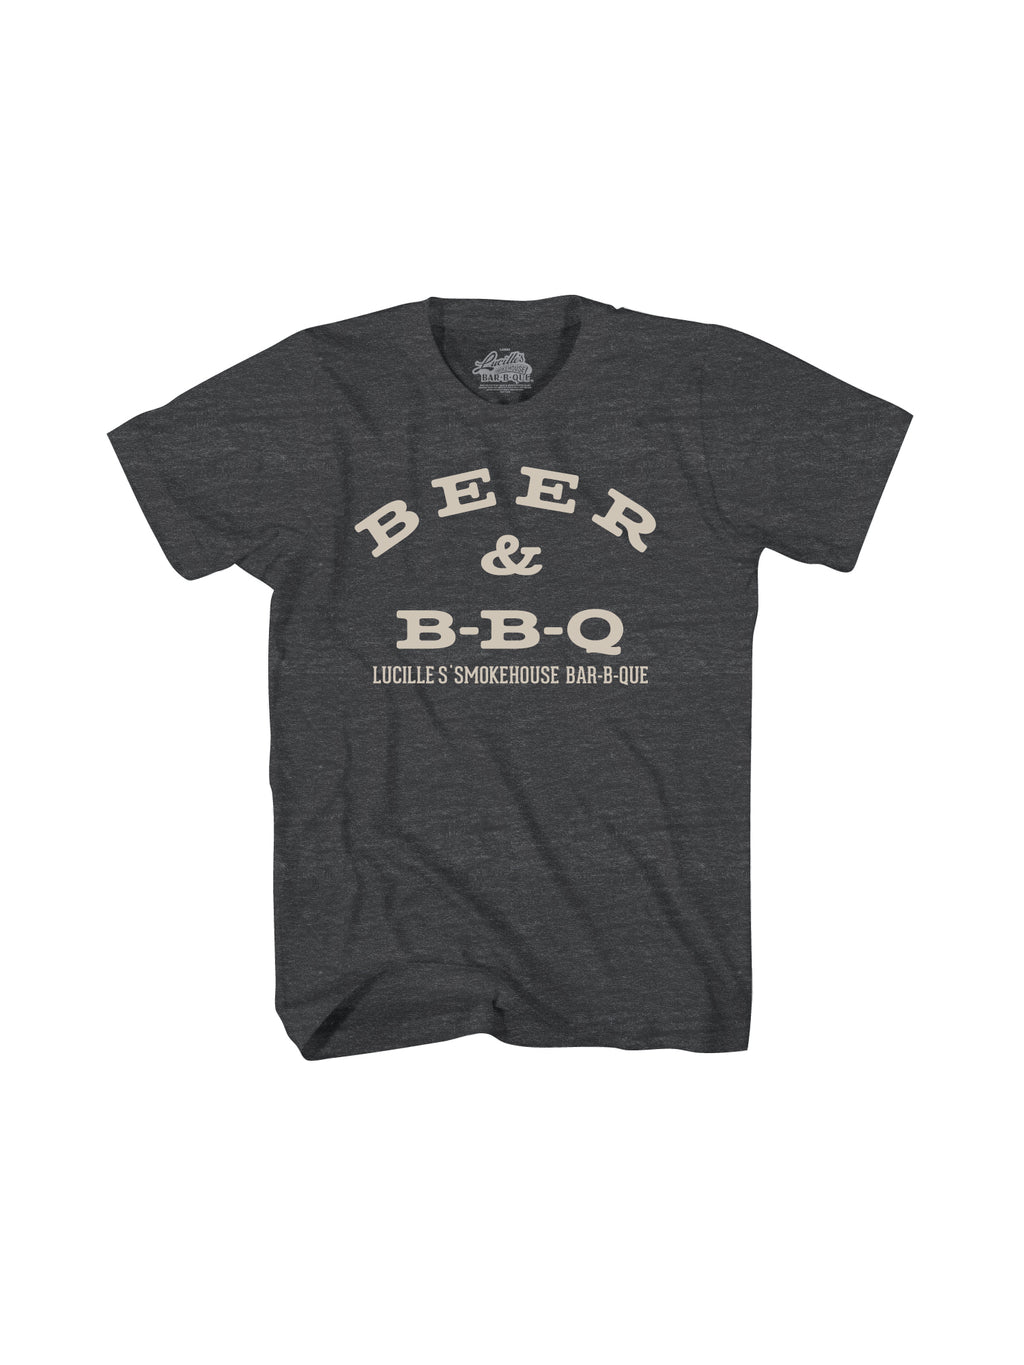 BEER AND BBQ (HEATHER CHARCOAL) - Anderson Bros Design and Supply